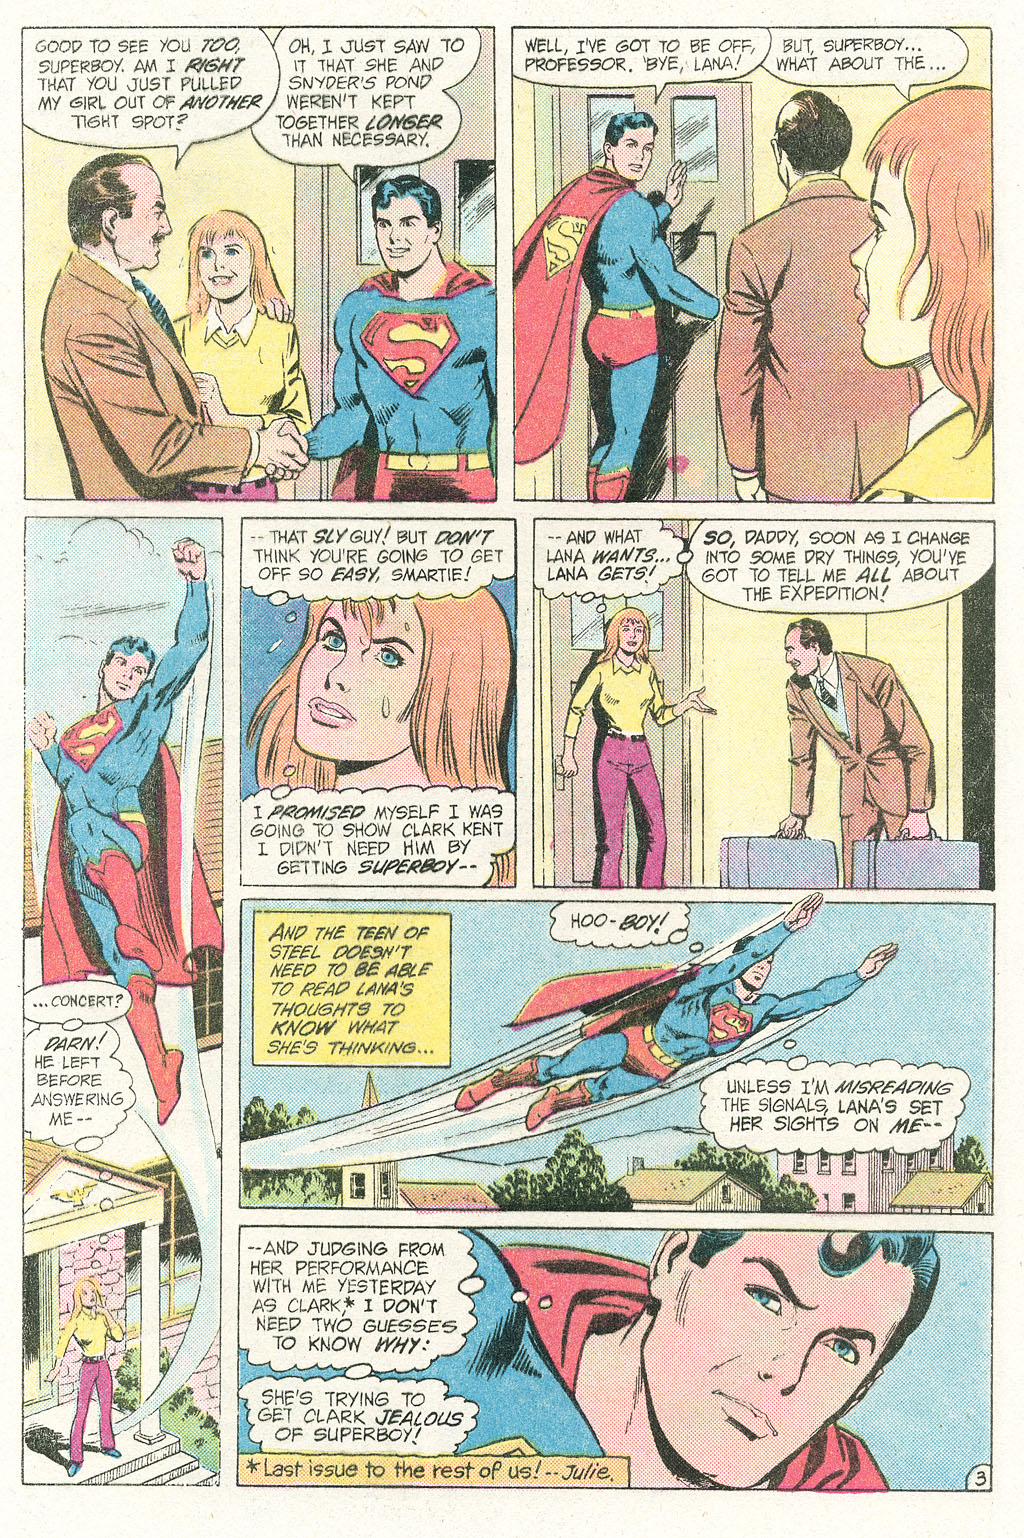 The New Adventures of Superboy 54 Page 4